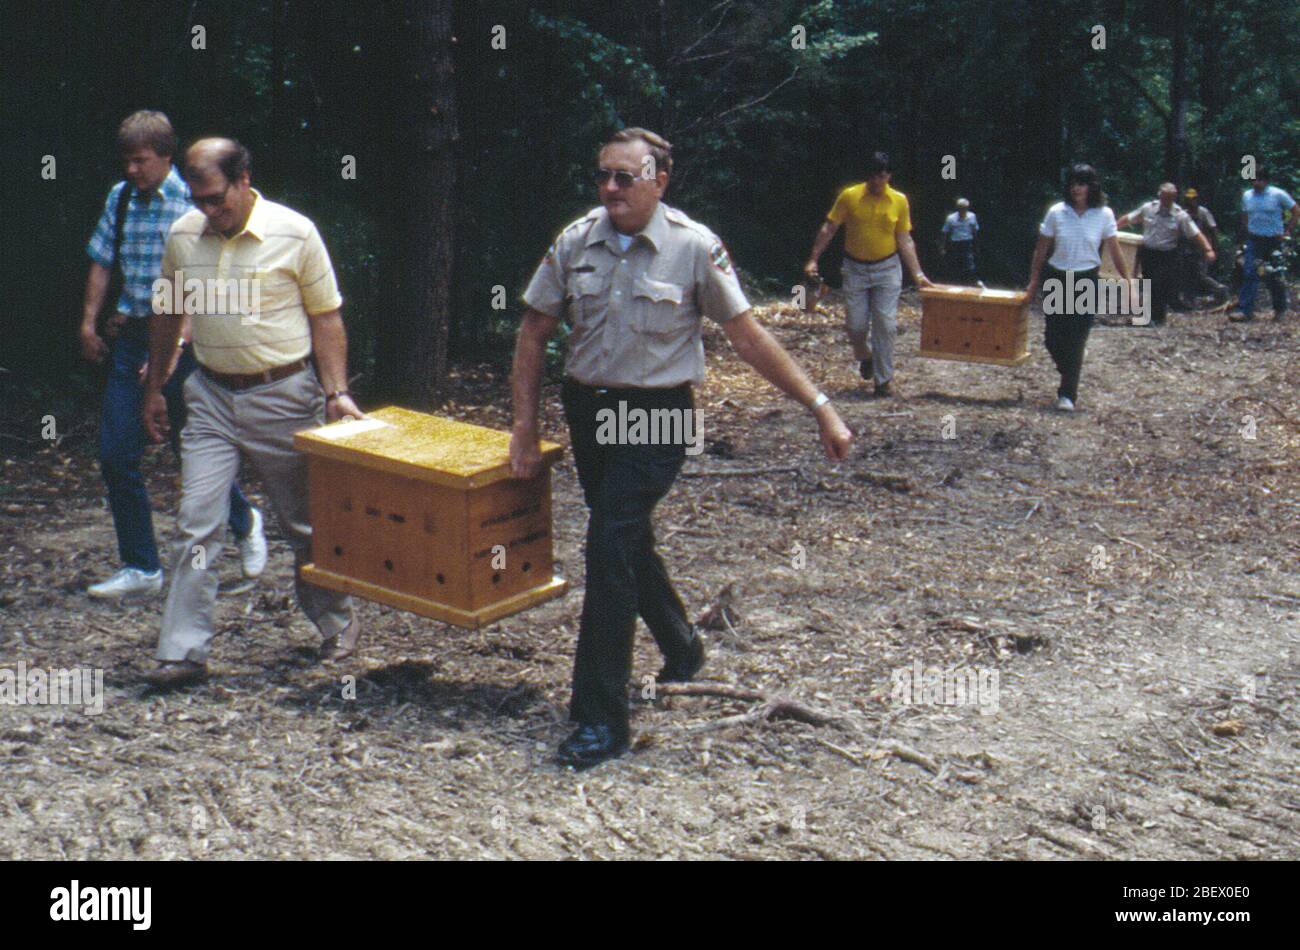 Seven-week-old American Bald Eagles arrive at Dale Hollow Lake July 26, 1989 to resettle them. The U.S. Army Corps of Engineers Nashville District conducted an Eagle Restoration Program and released 44 eagles between 1987 and 1991 to restore nesting populations along waterways in Tennessee and Kentucky. (USACE photo) Stock Photo